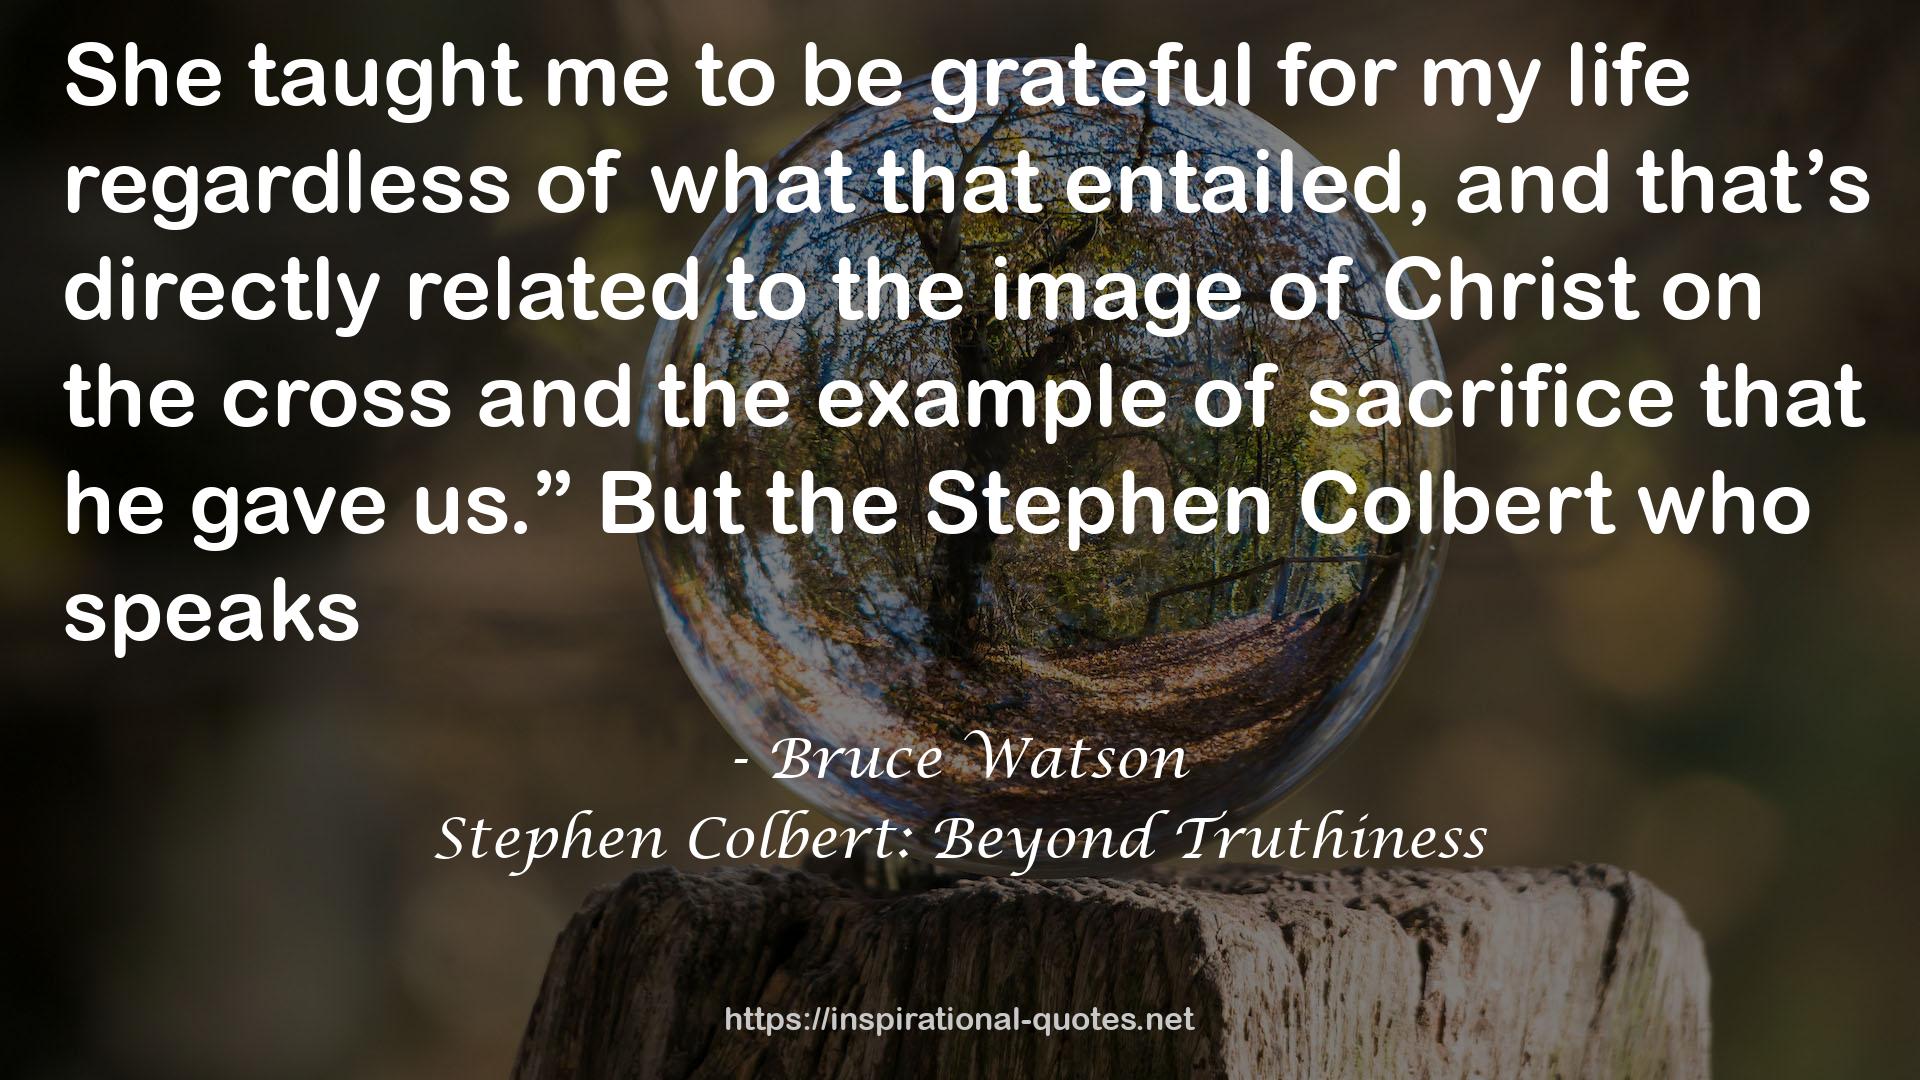 Stephen Colbert: Beyond Truthiness QUOTES